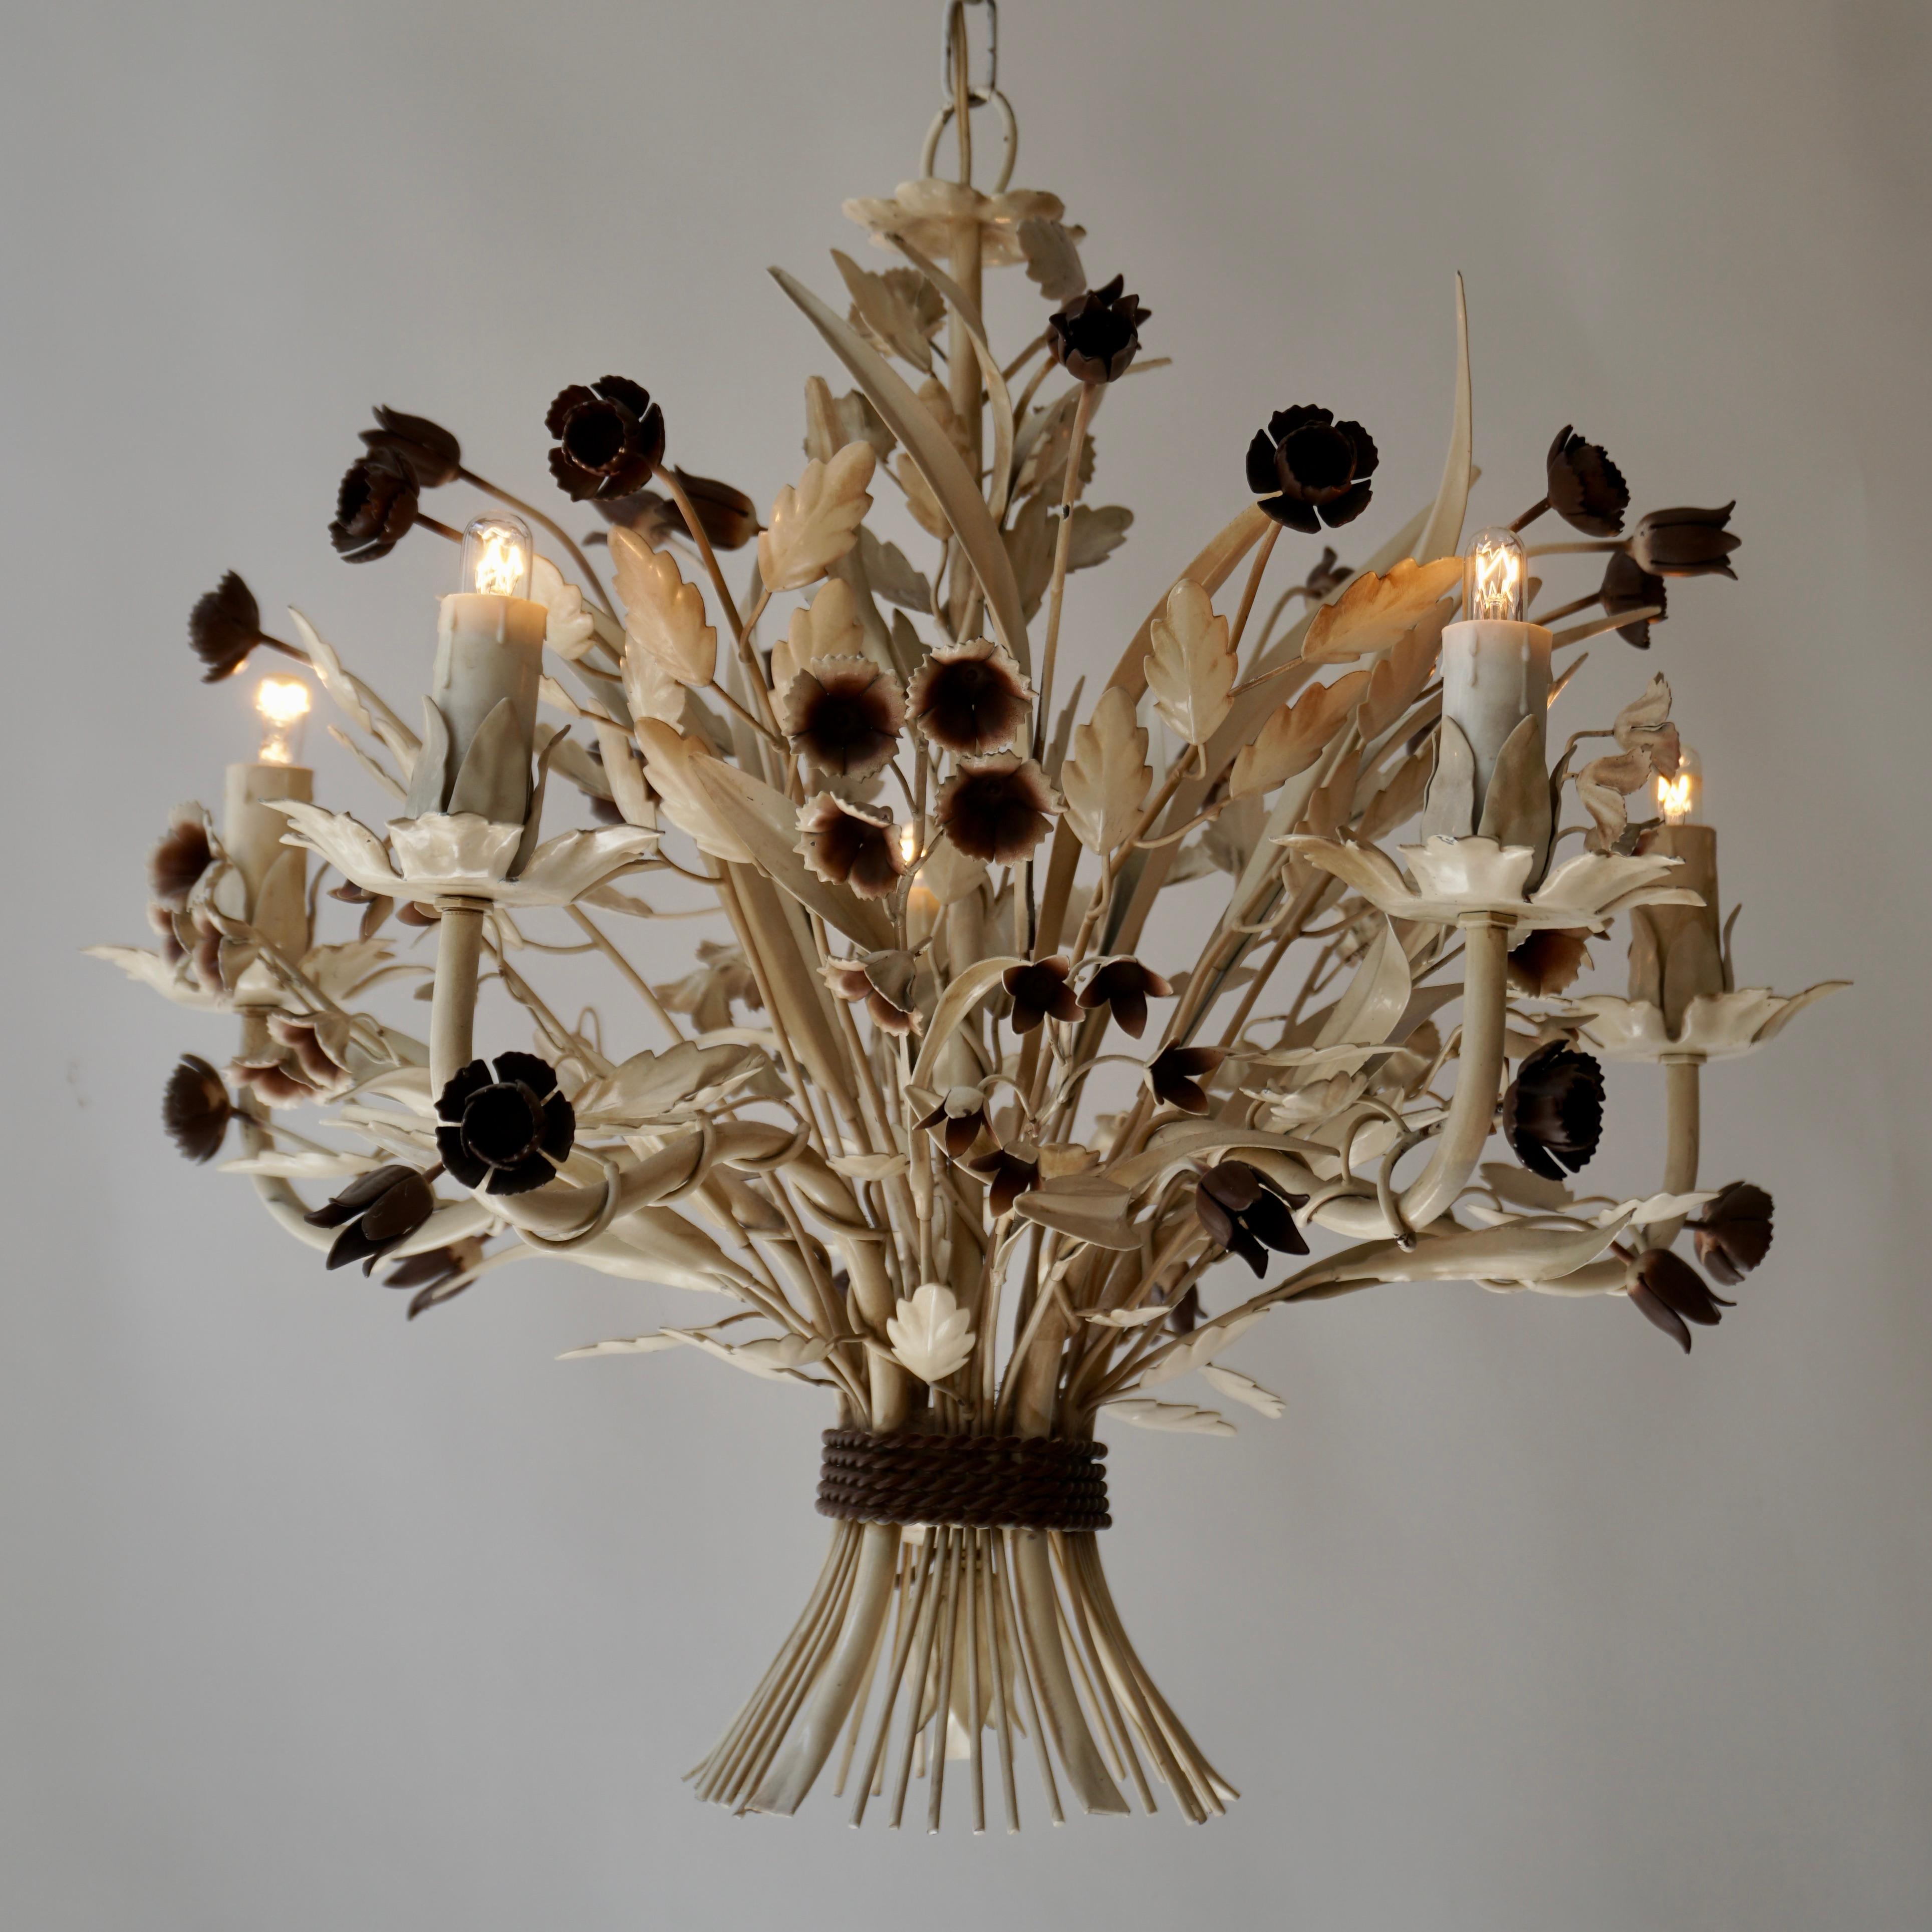 Mid-Century Modern Painted Tole Flower Chandelier, Italy, circa 1950s For Sale